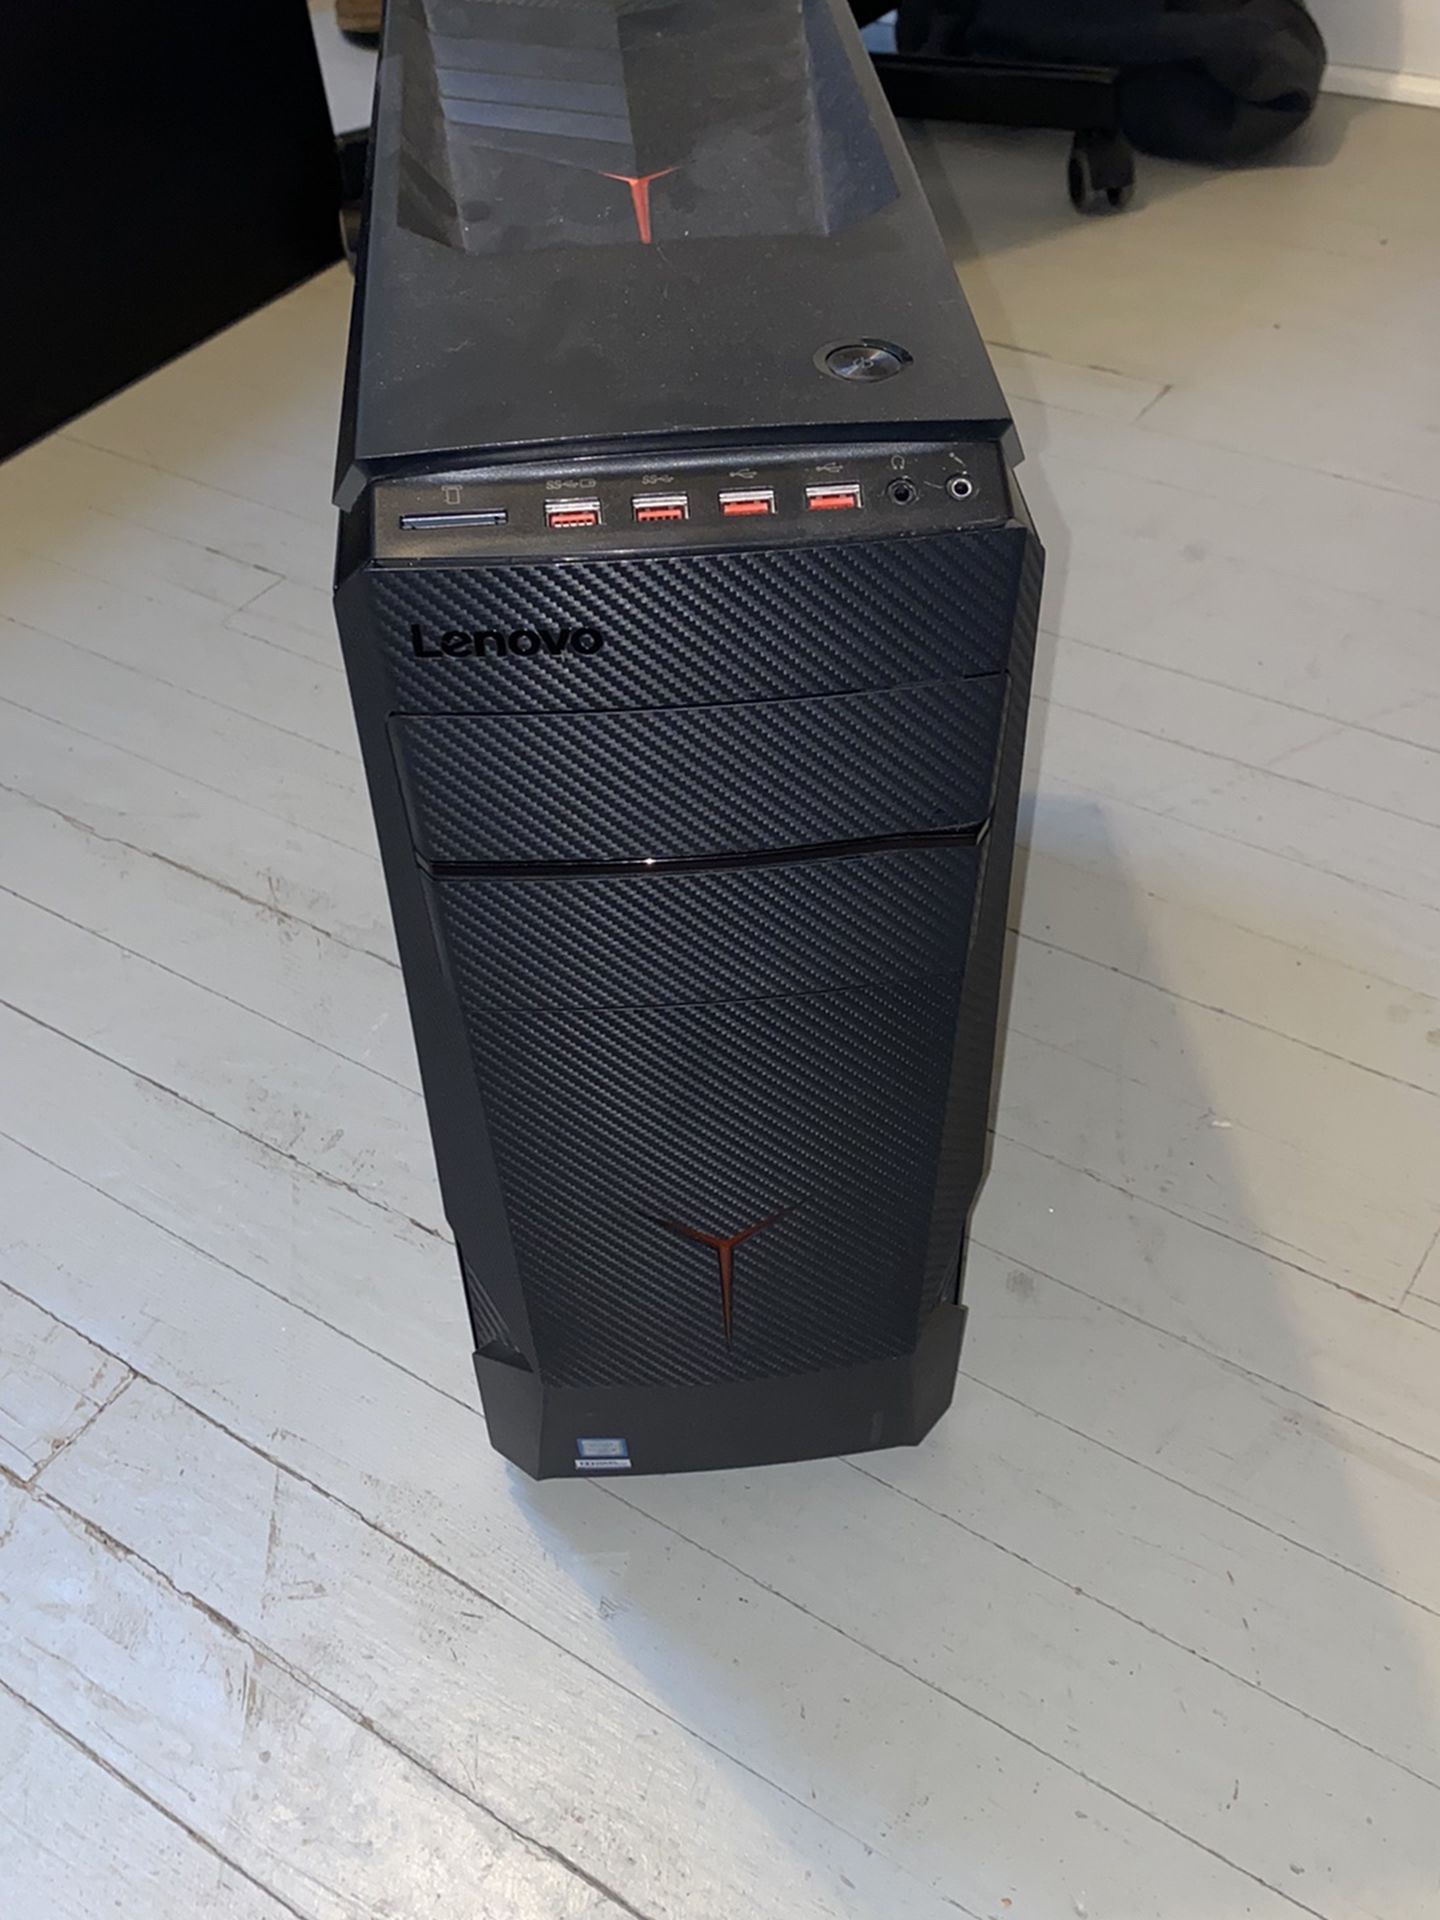 Lenovo Legion Y720 Gaming PC (added GTX 1070 graphics card) with G710+ Keyboard